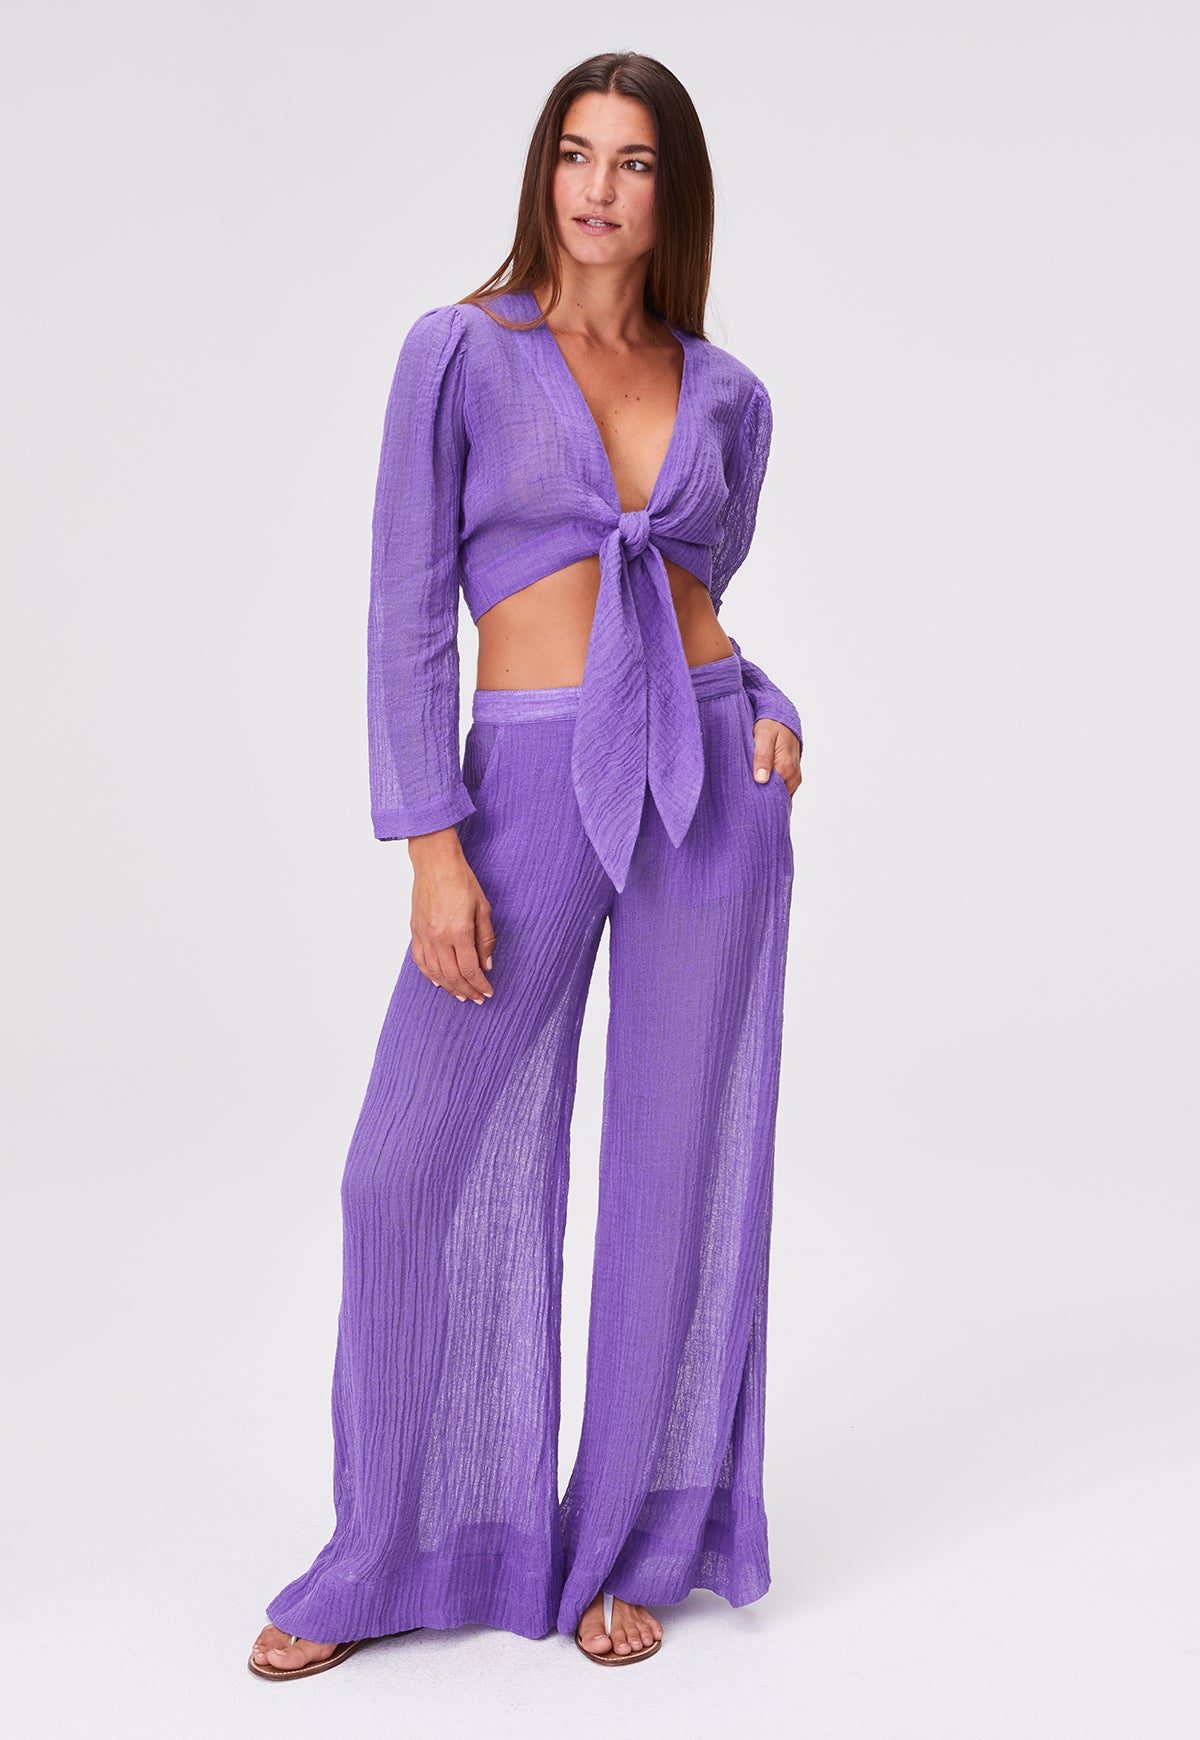 THE LOW-WAIST WIDE LEG PANT in LAVENDER SORRENTO GAUZE